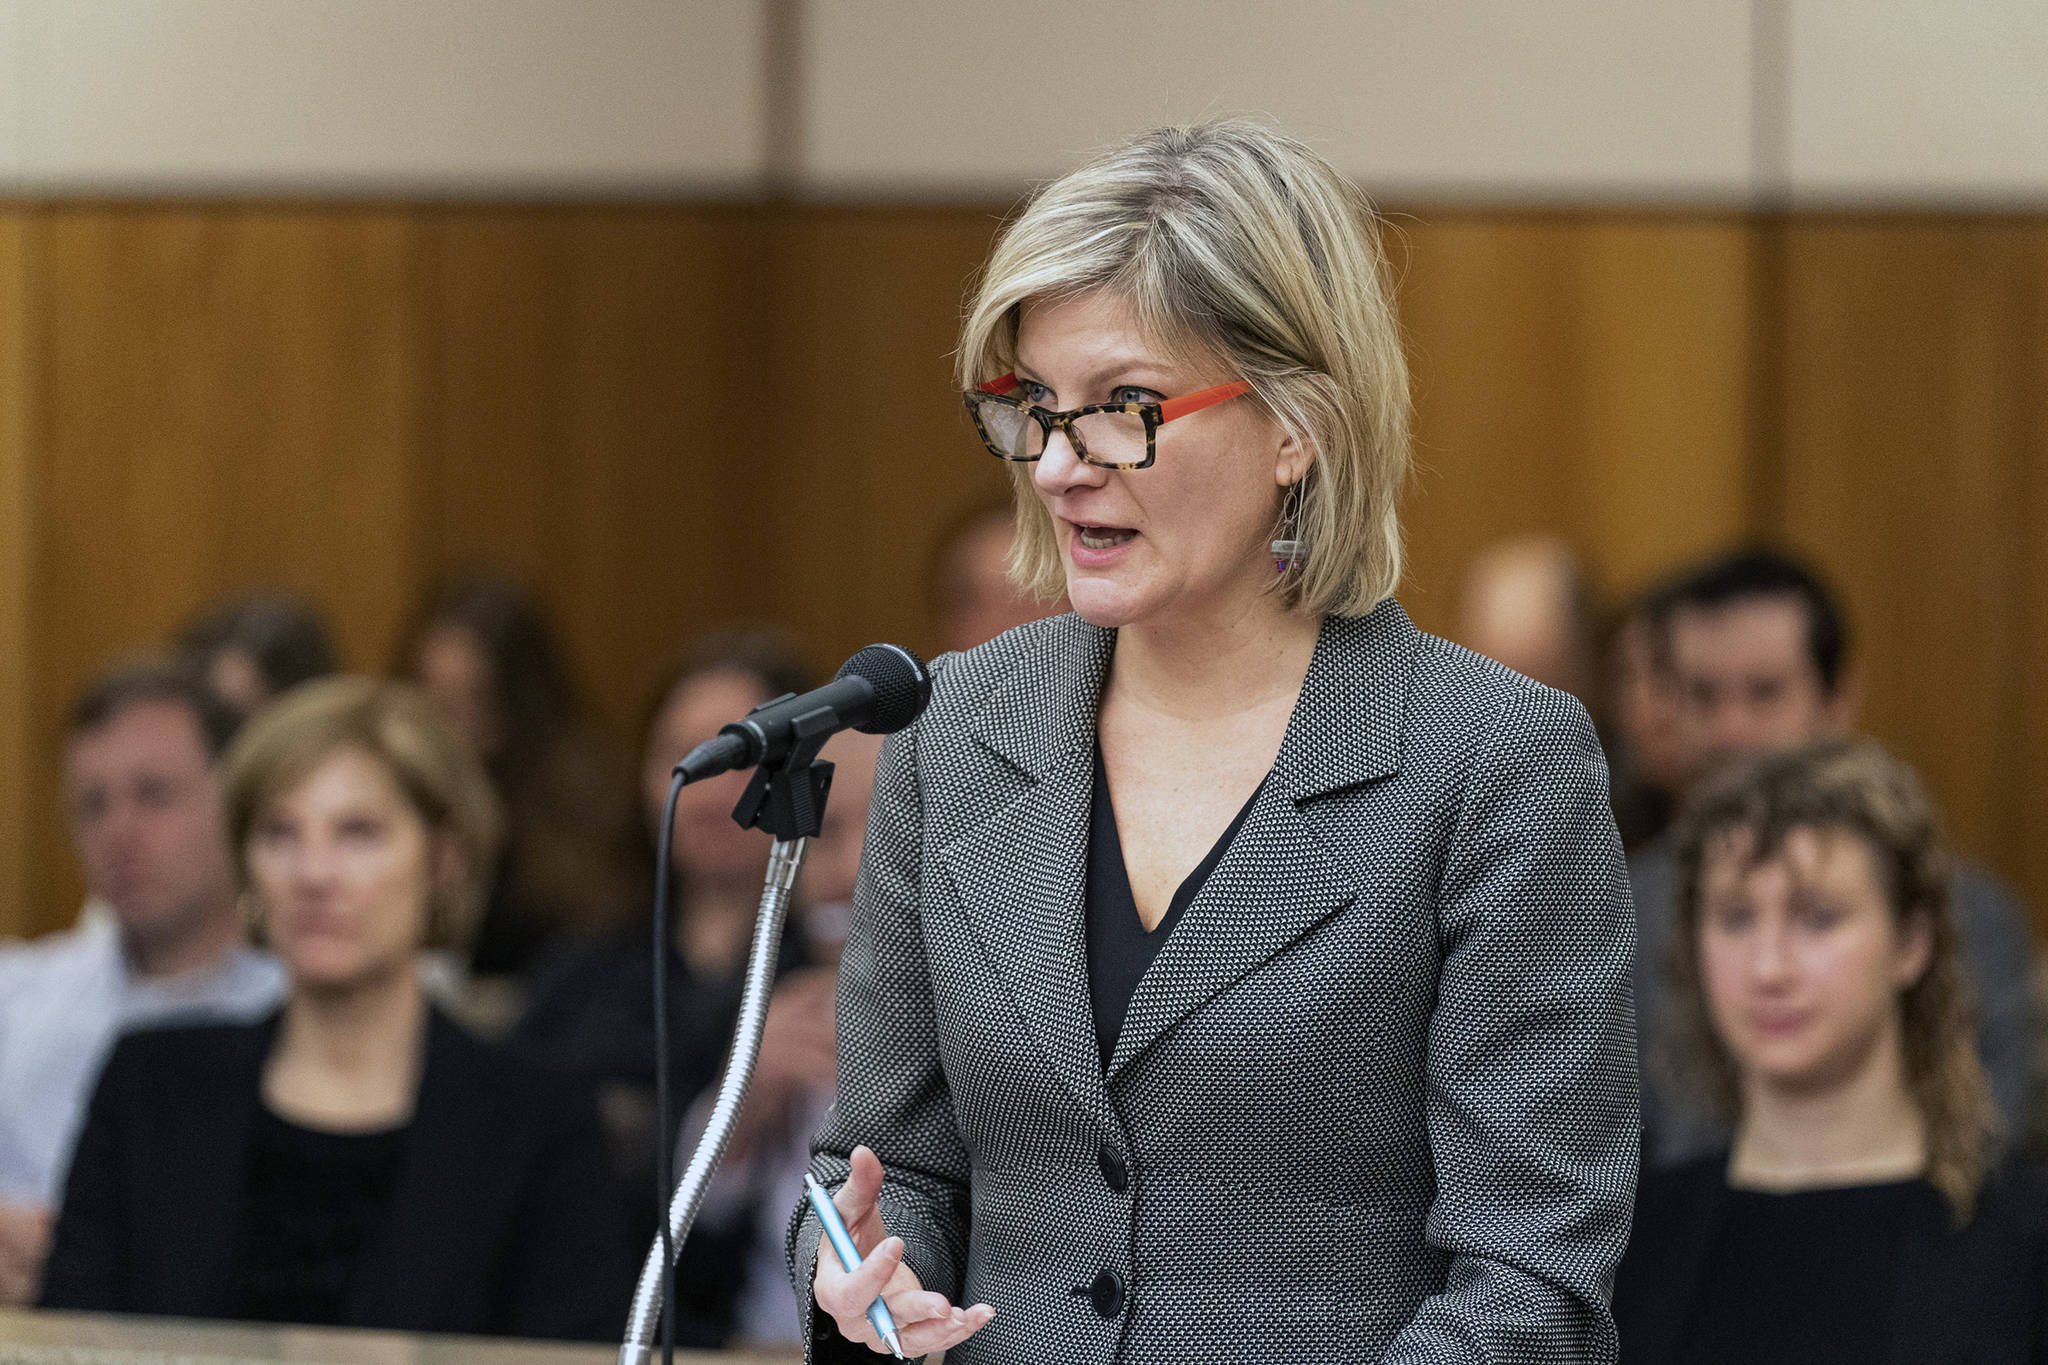 Former Alaska Attorney General Jahna Lindemuth argues on behalf of the Recall Dunleavy campaign Frida in Alaska Superior Court. Judge Eric Aarseth ruled that an effort to recall Gov. Mike Dunleavy may proceed, a decision that is expected to be appealed. (Loren Holmes | Anchorage Daily News via AP)